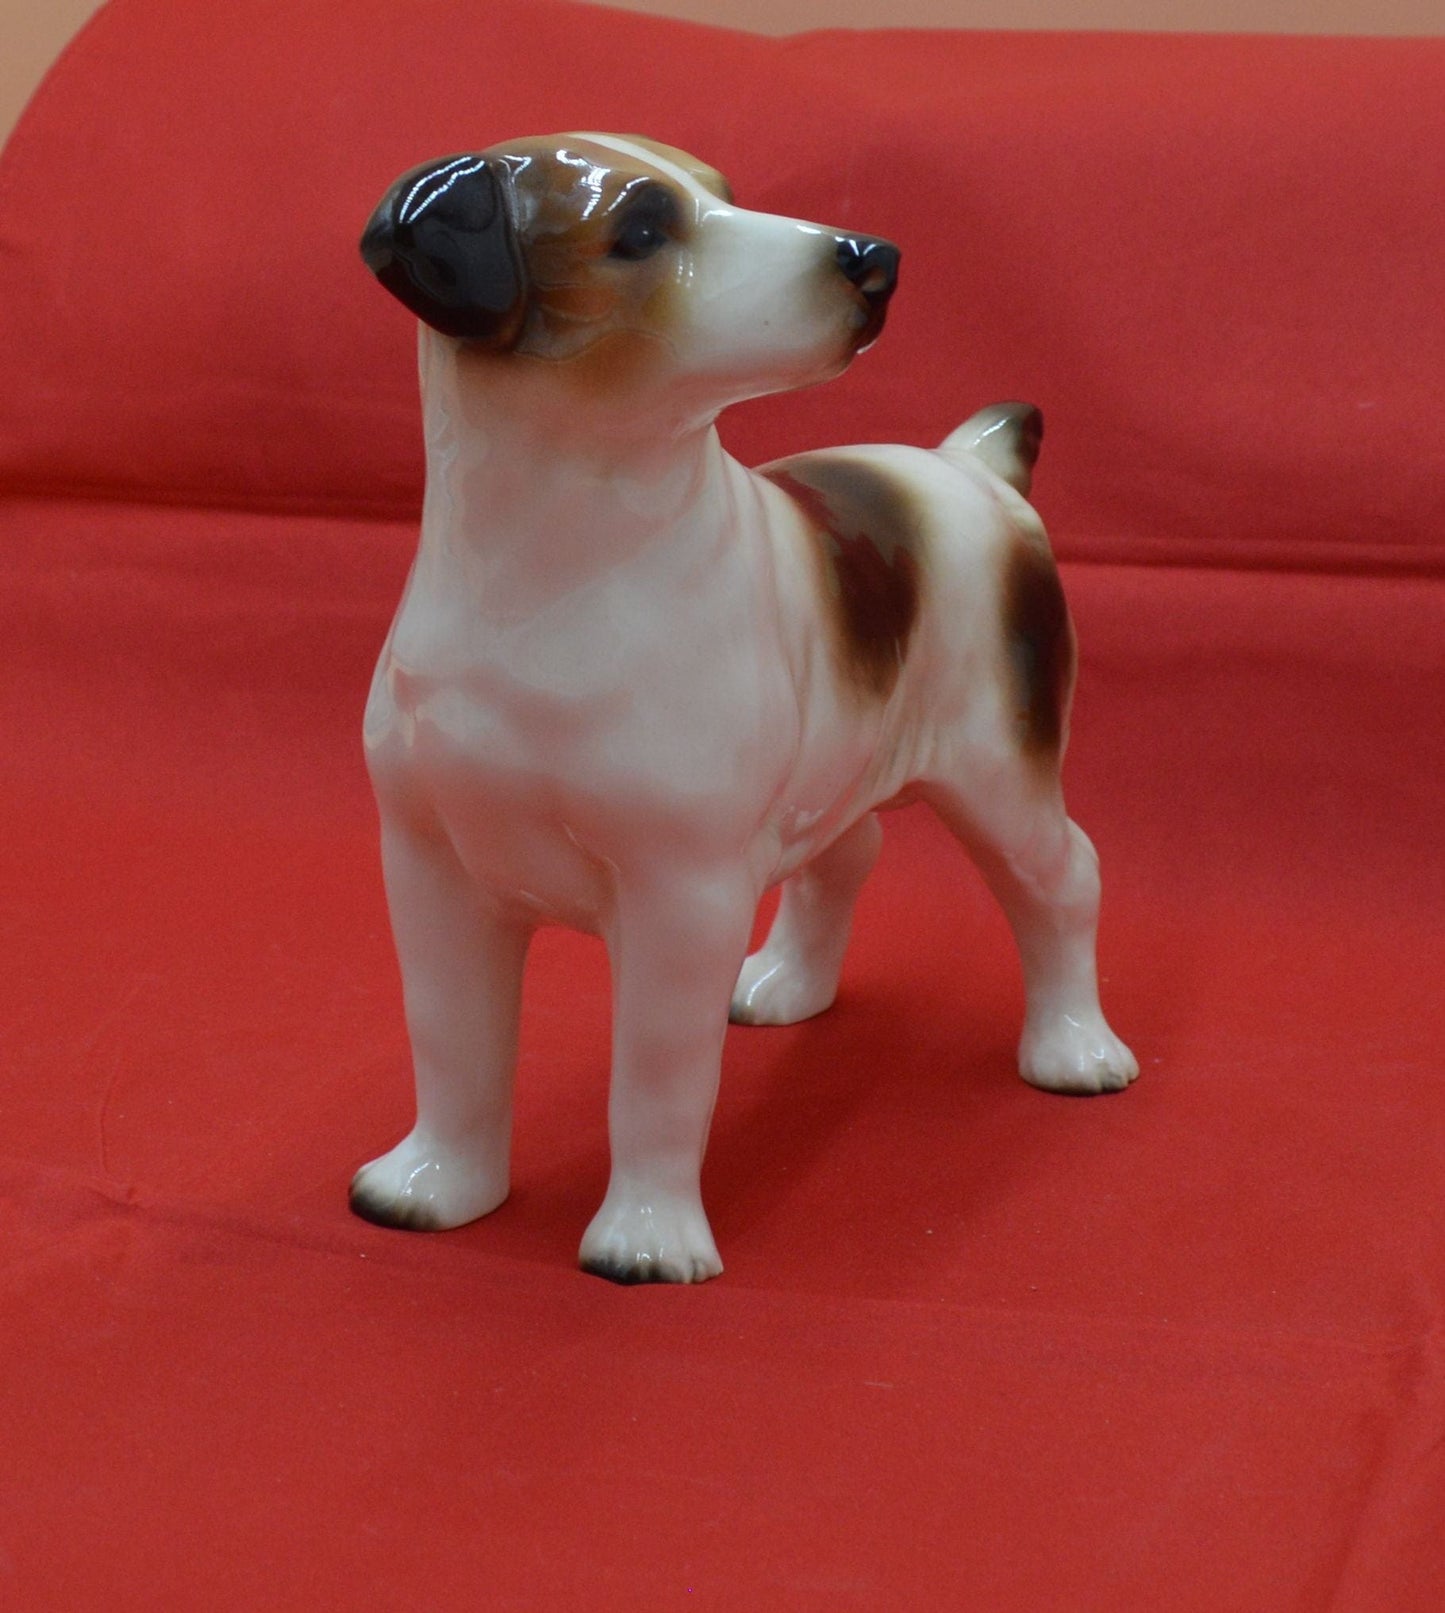 DOG FIGURINE COOPERCRAFT JACK RUSSELL TERRIER(PREVIOUSLY OWNED) GOOD CONDITION - TMD167207